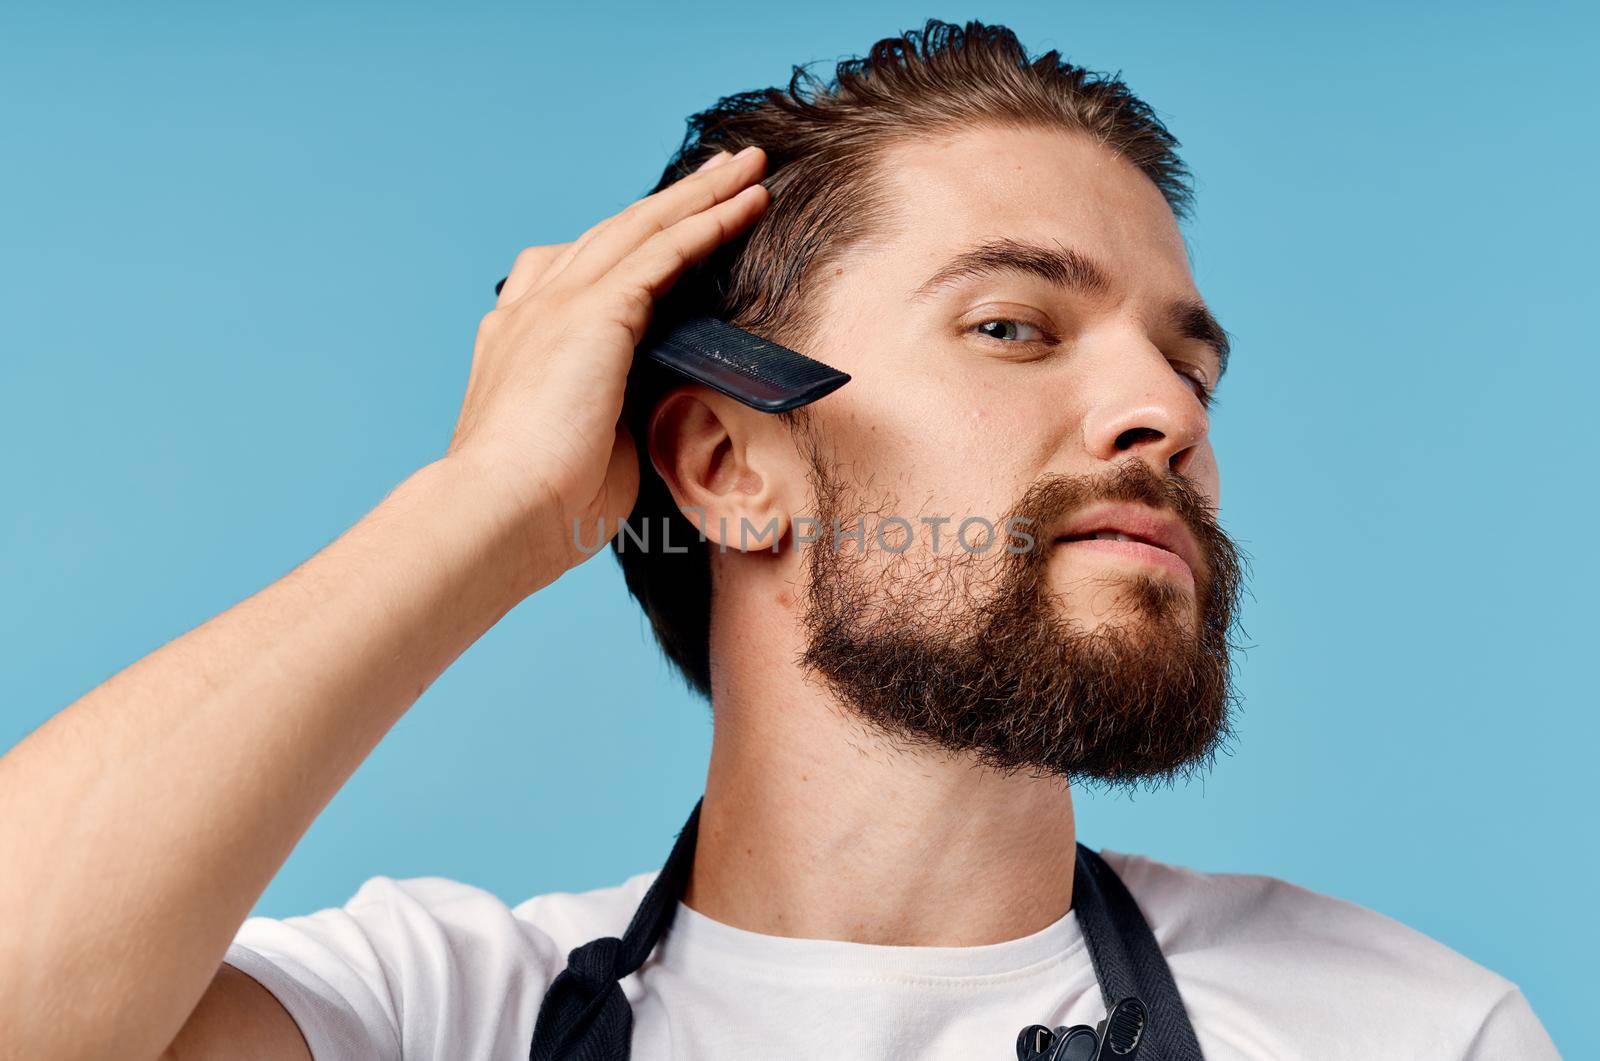 male hairdresser barbershop haircut Professional. High quality photo